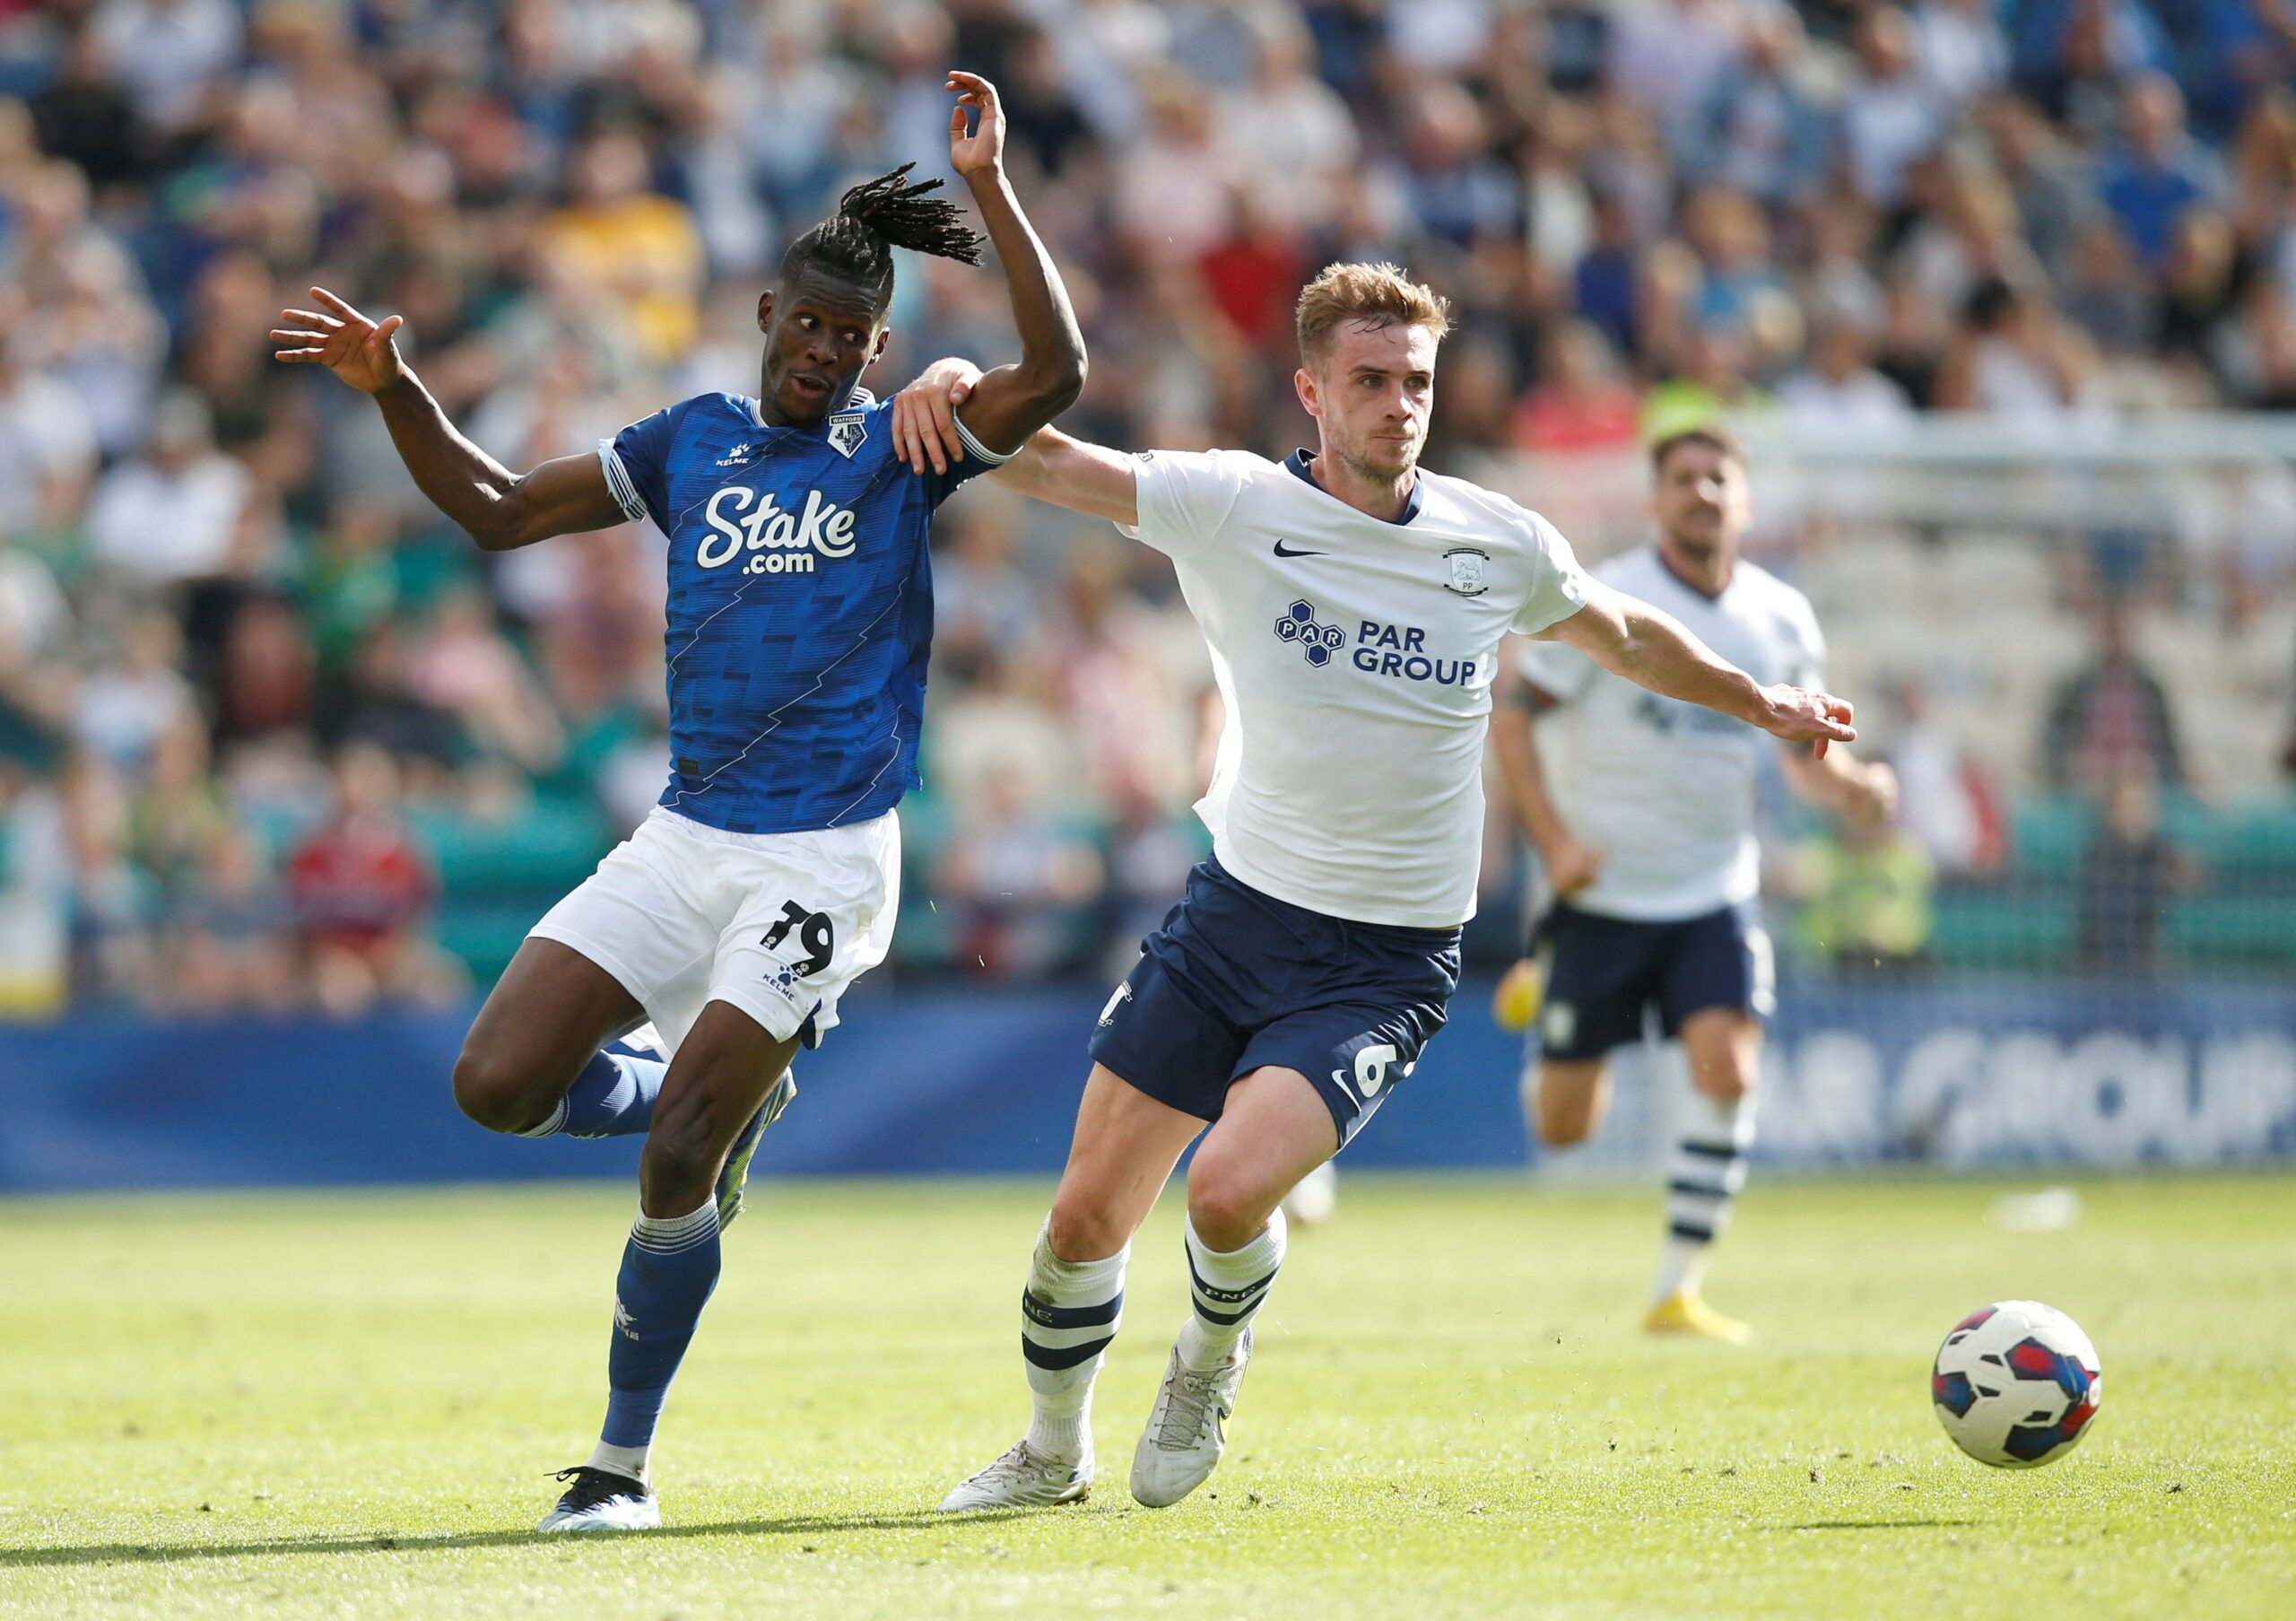 Soccer Football - Championship - Preston North End v Watford - Deepdale, Preston, Britain - August 20, 2022 Watford's Vakoun Bayo and Preston North End's Liam Lindsay in action Action Images/Ed Sykes  EDITORIAL USE ONLY. No use with unauthorized audio, video, data, fixture lists, club/league logos or 